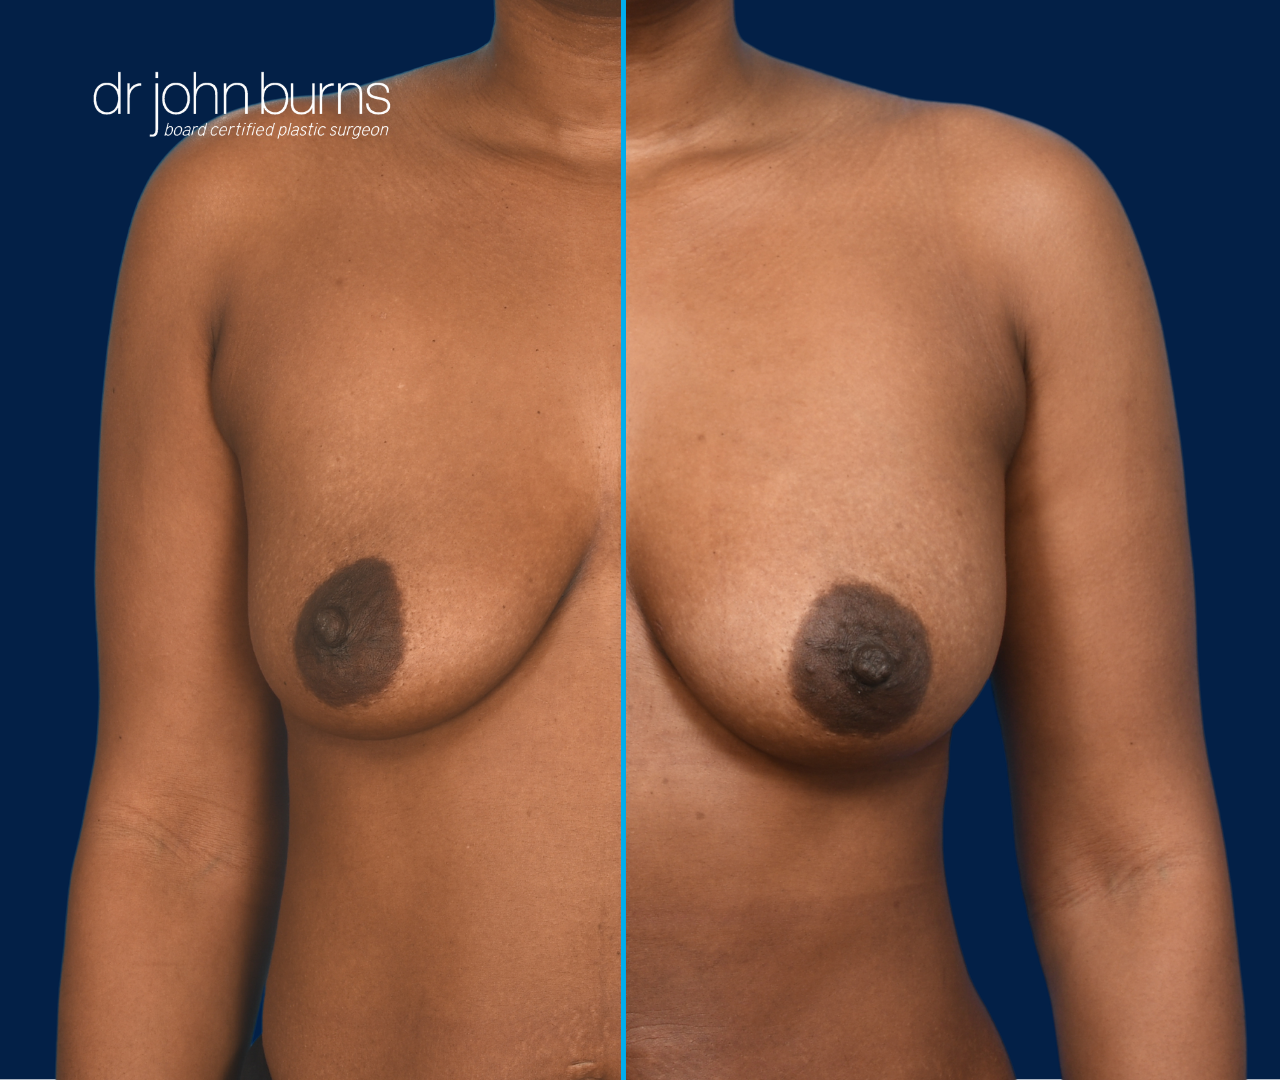 case 11- split screen before & after fat transfer to breast by top plastic surgeon, Dr. John Burns